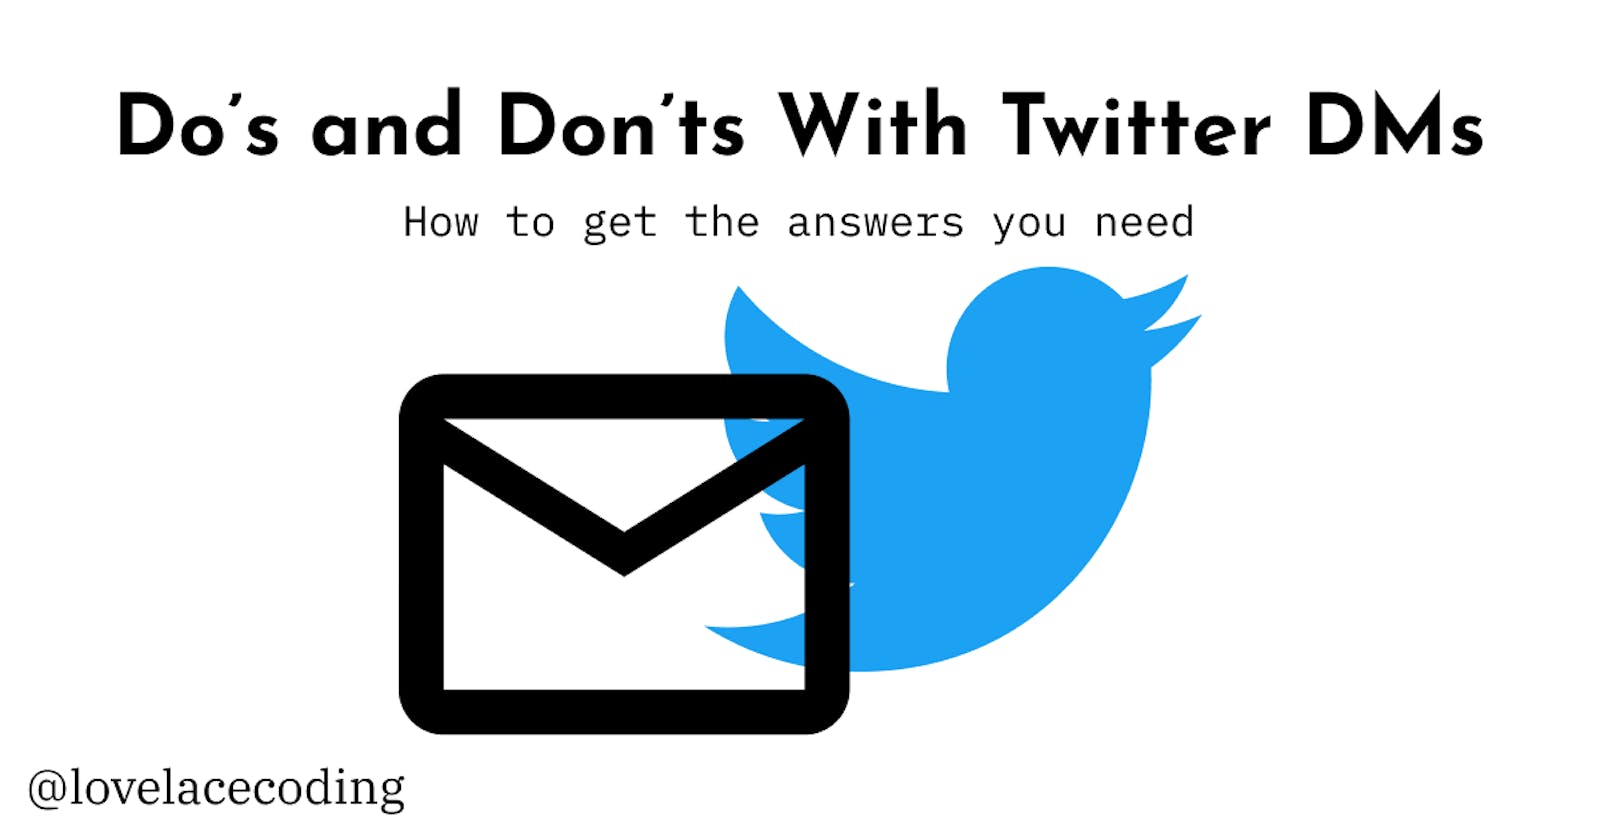 Do's and Don'ts with Twitter DMs